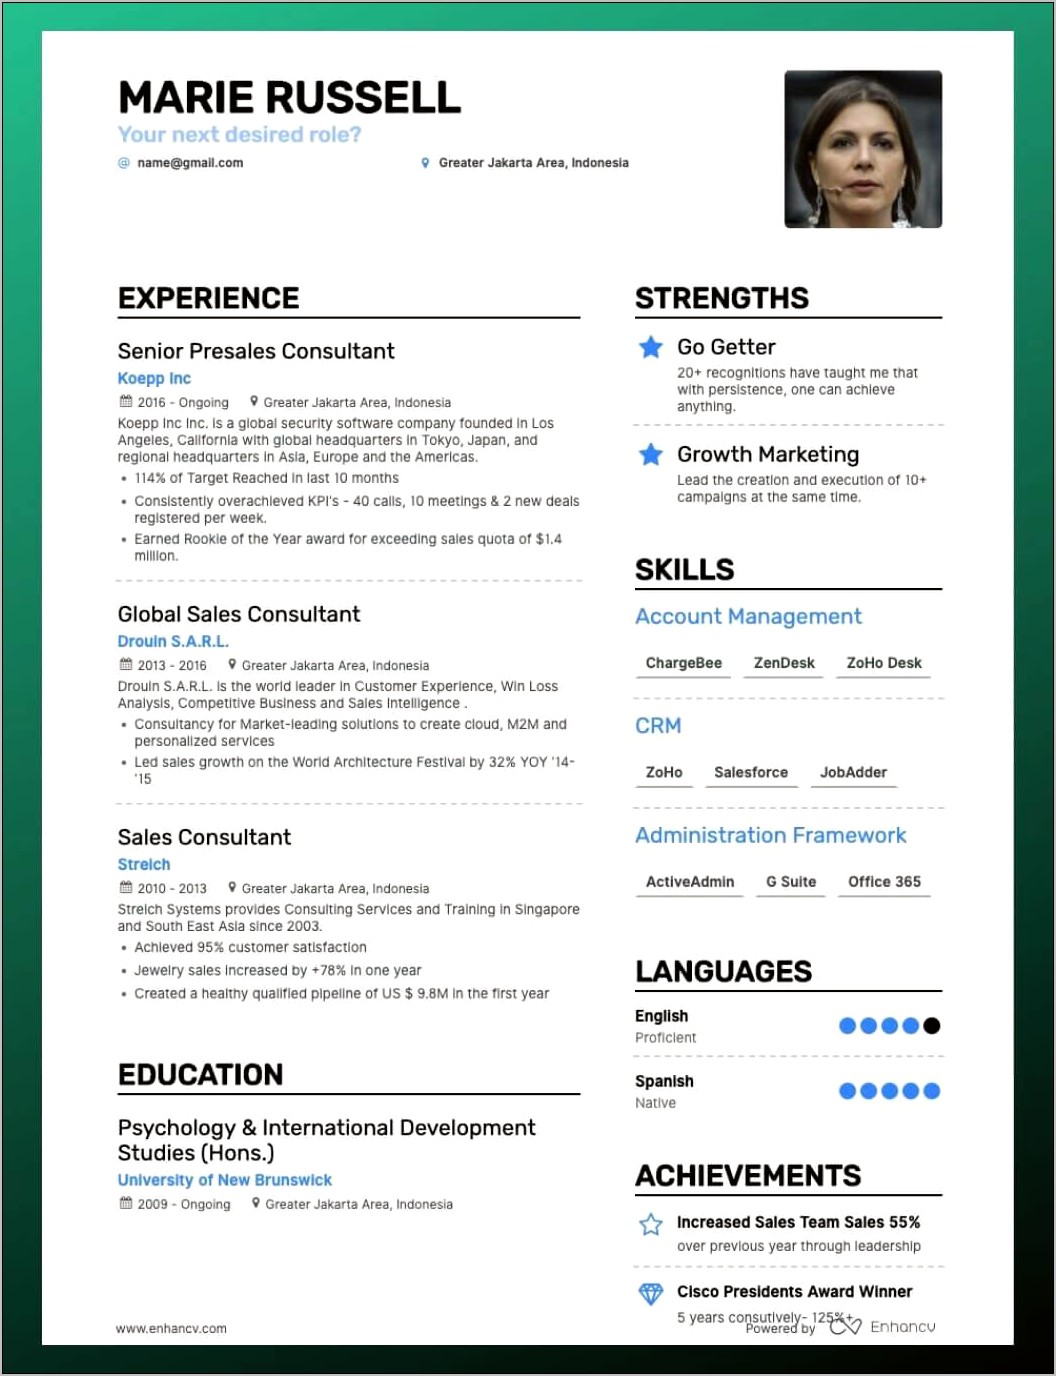 Not Having A Skills Section In A Resume